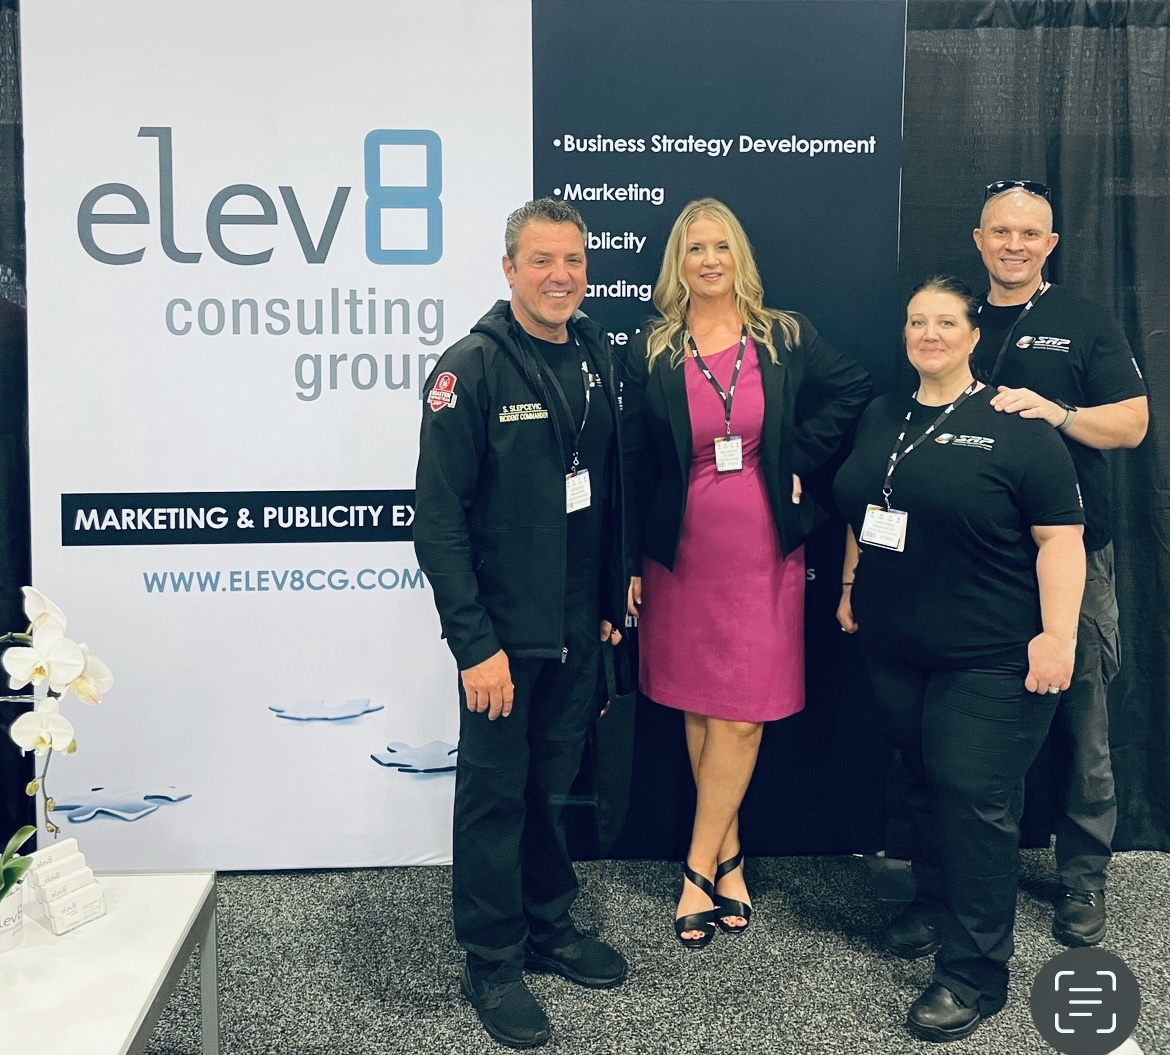 Elev8 Consulting Group CEO Angela Delmedico Presents on Marketing and Technology at Miami Expo